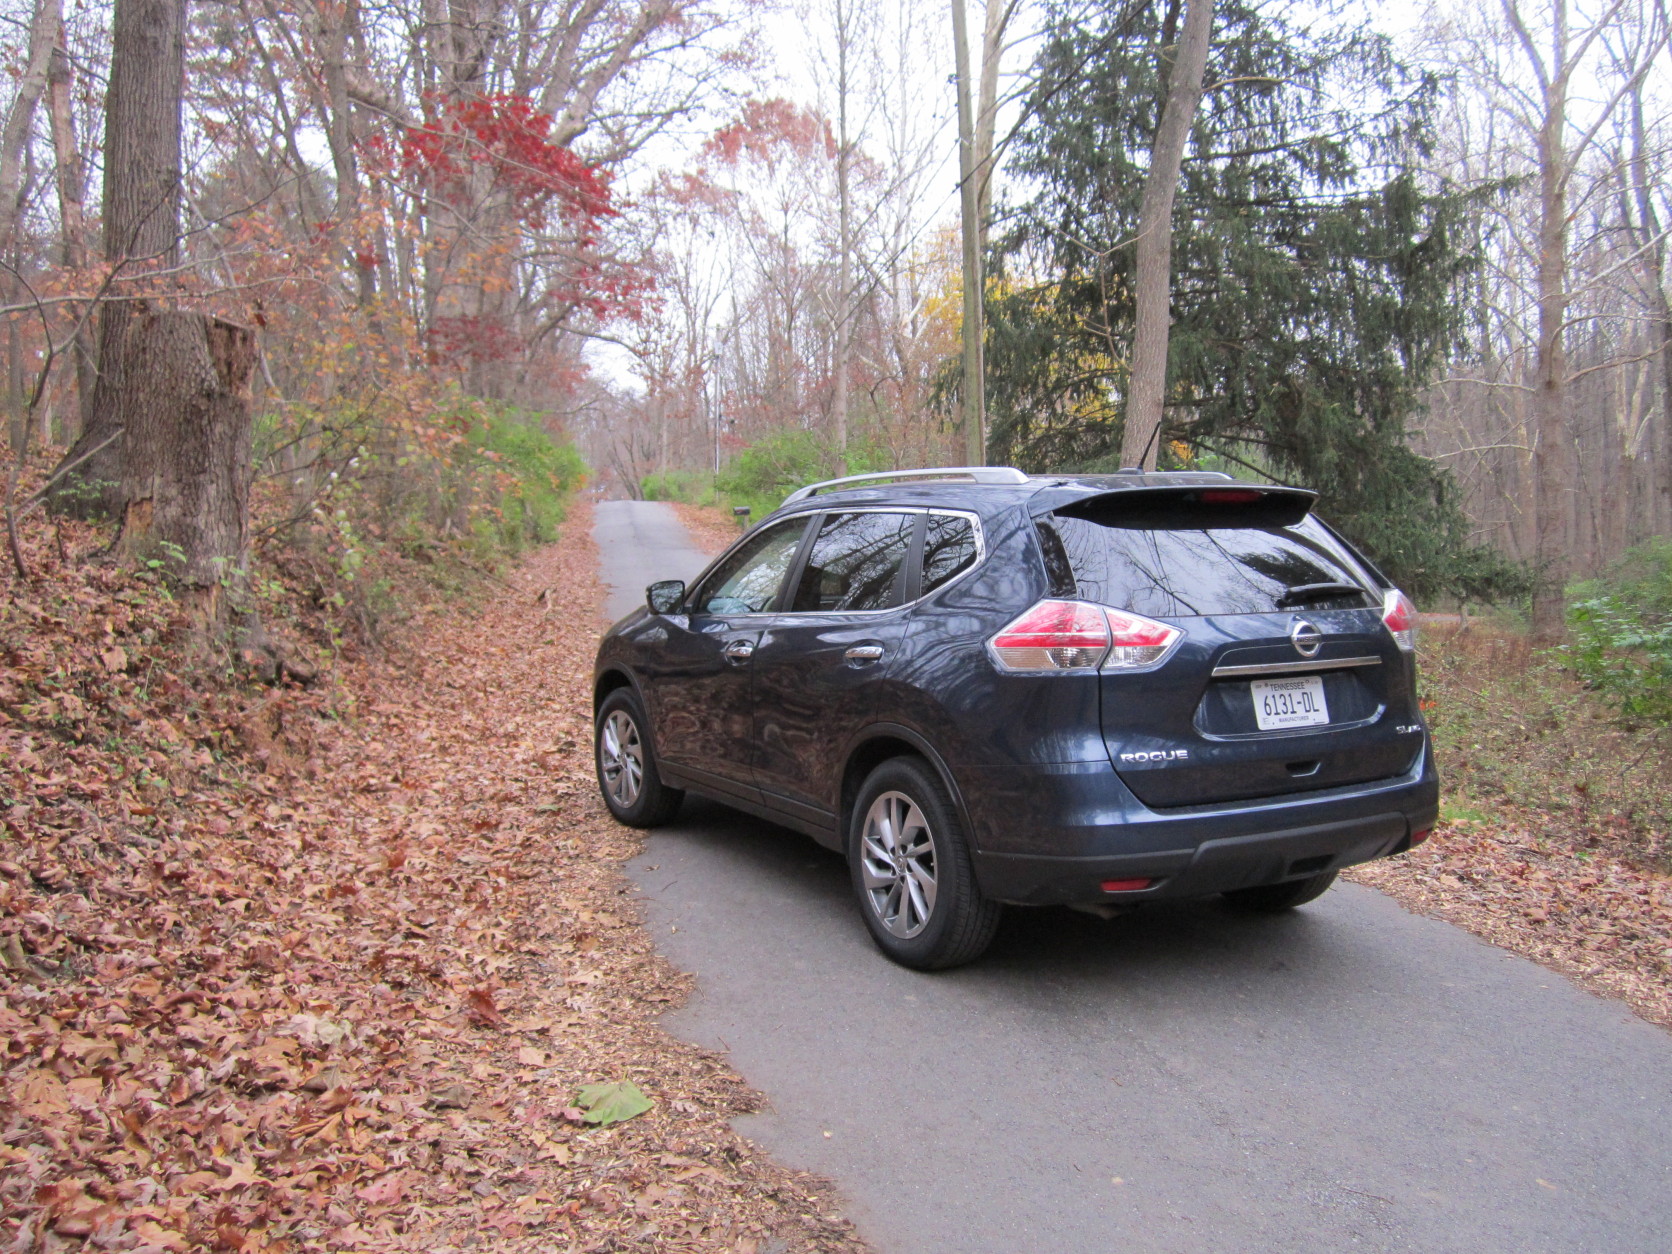 The 2015 Nissan Rogue's power rear lift gate is a welcome feature in the small crossover class. (WTOP/Mike Parris)